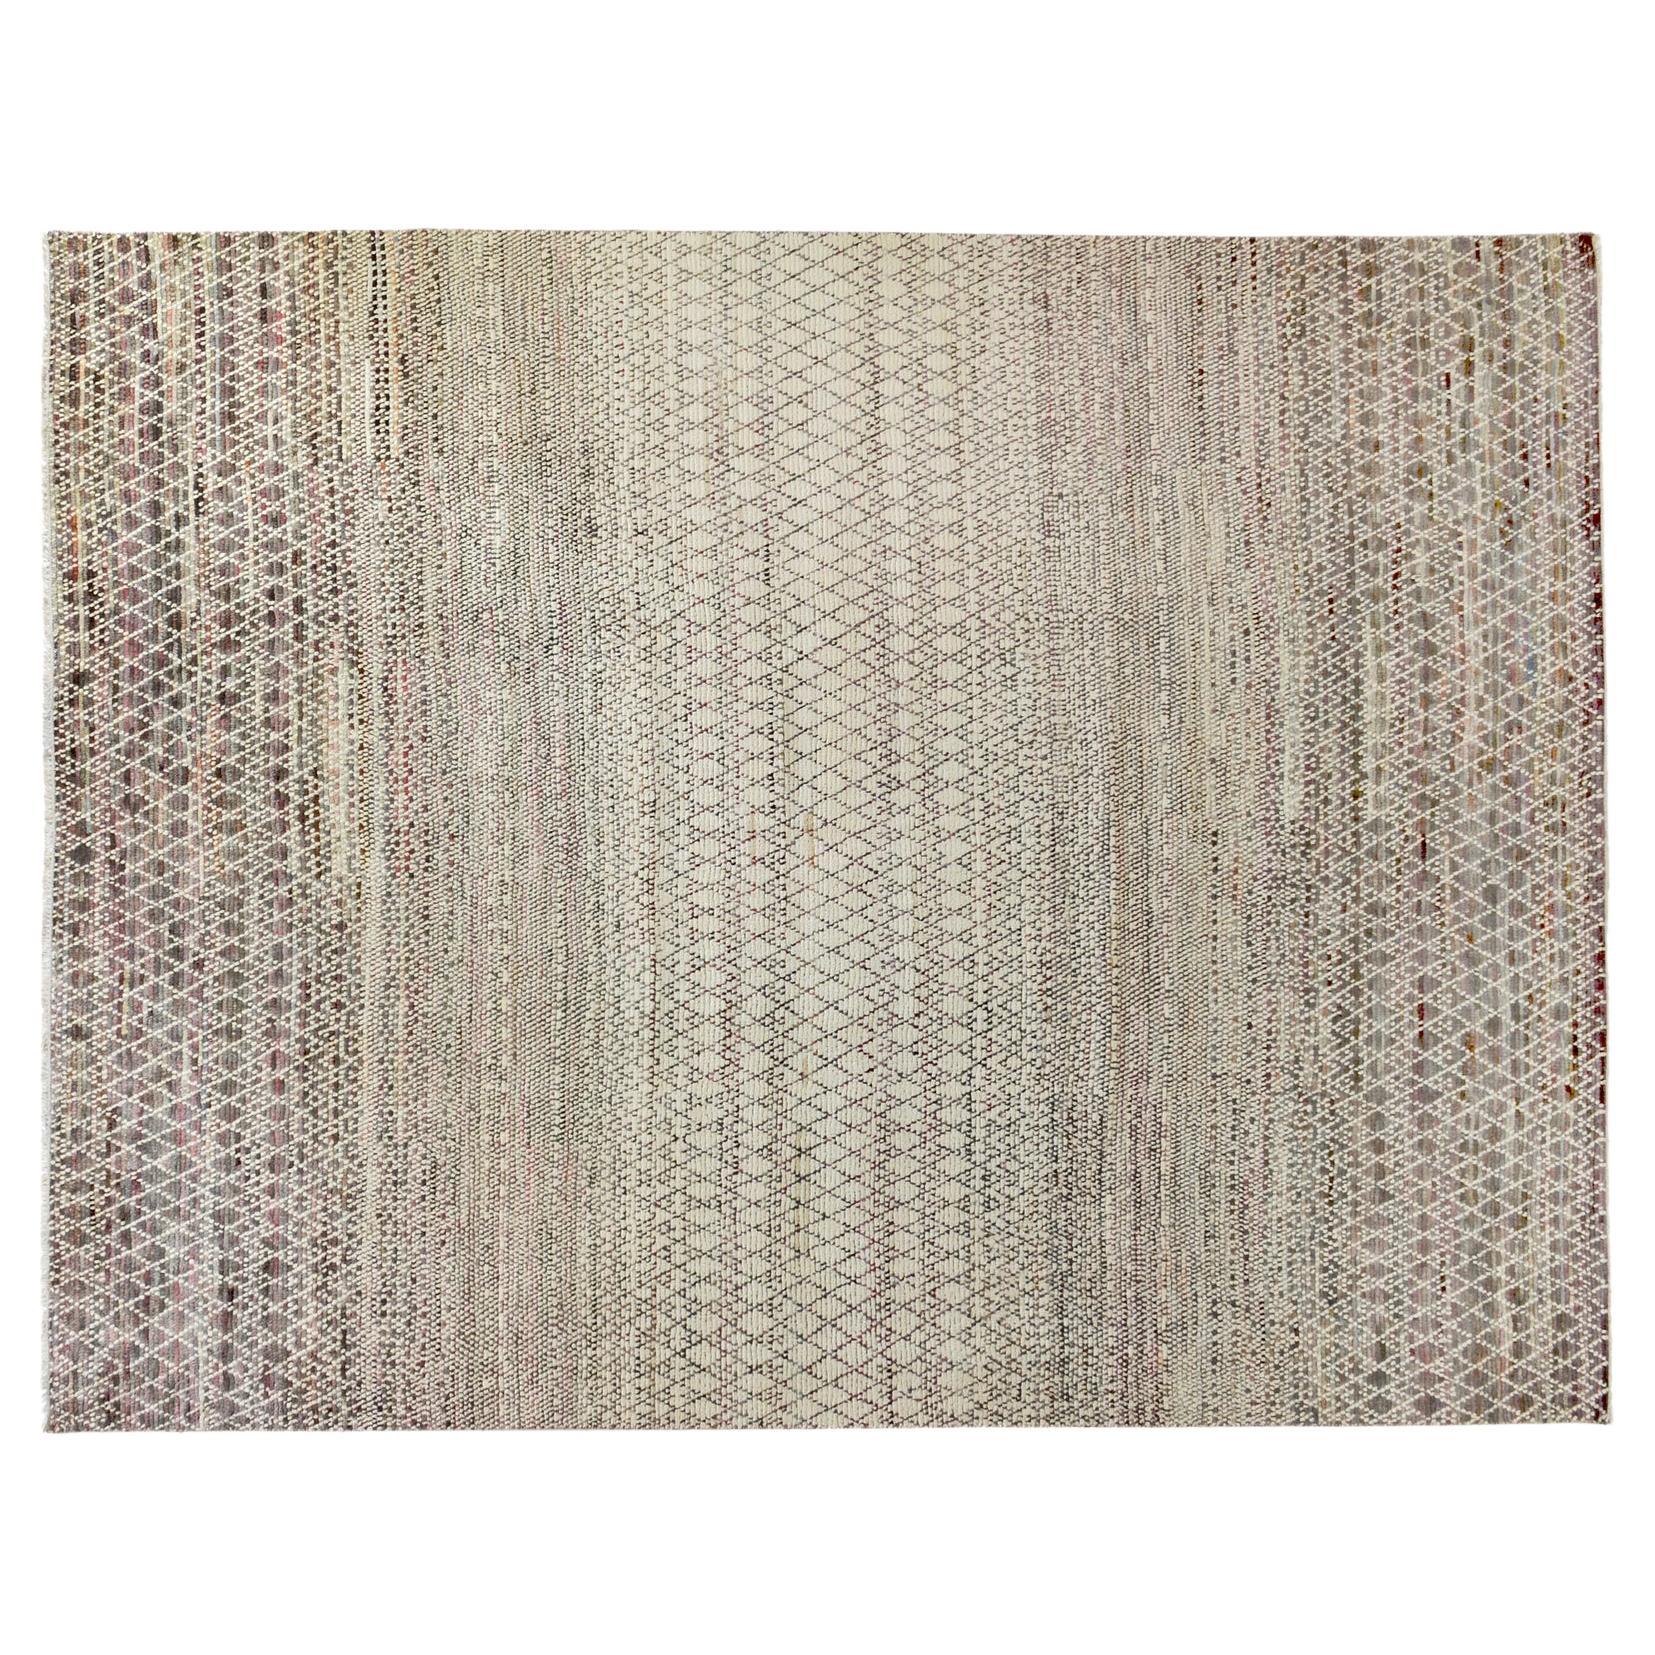 Brown and Burgundy Multi-Color Area Rug For Sale